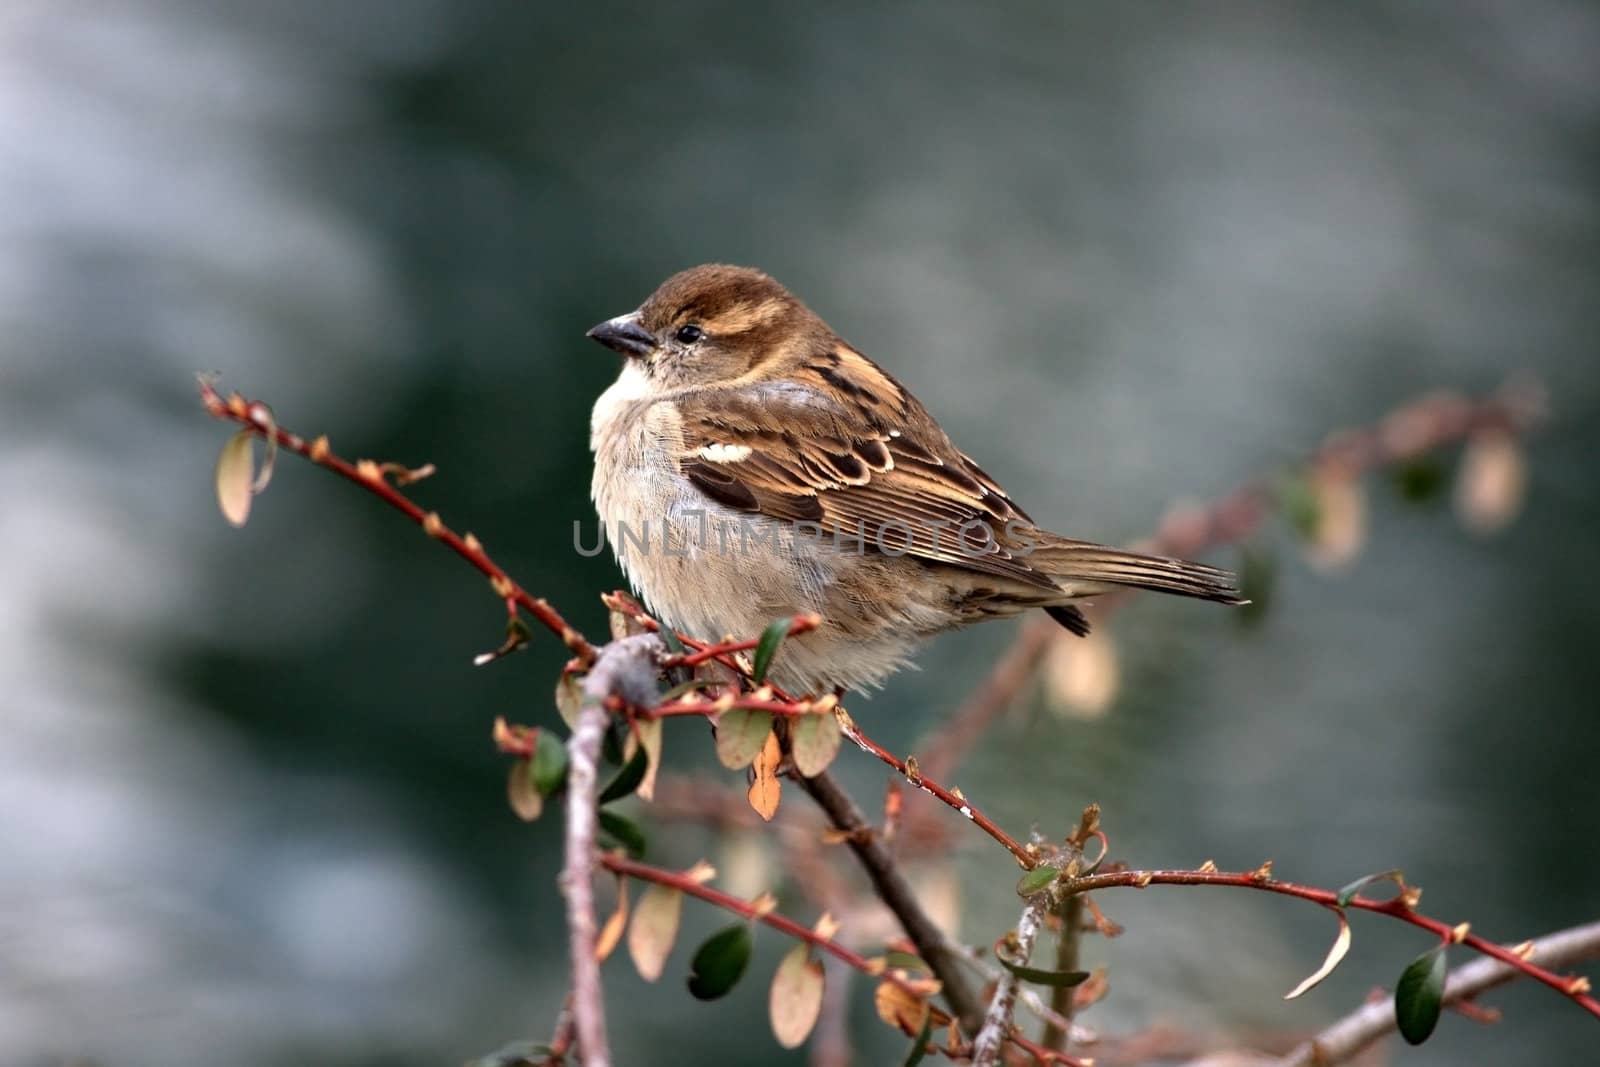 Close view of a sparrow sitting on a bush